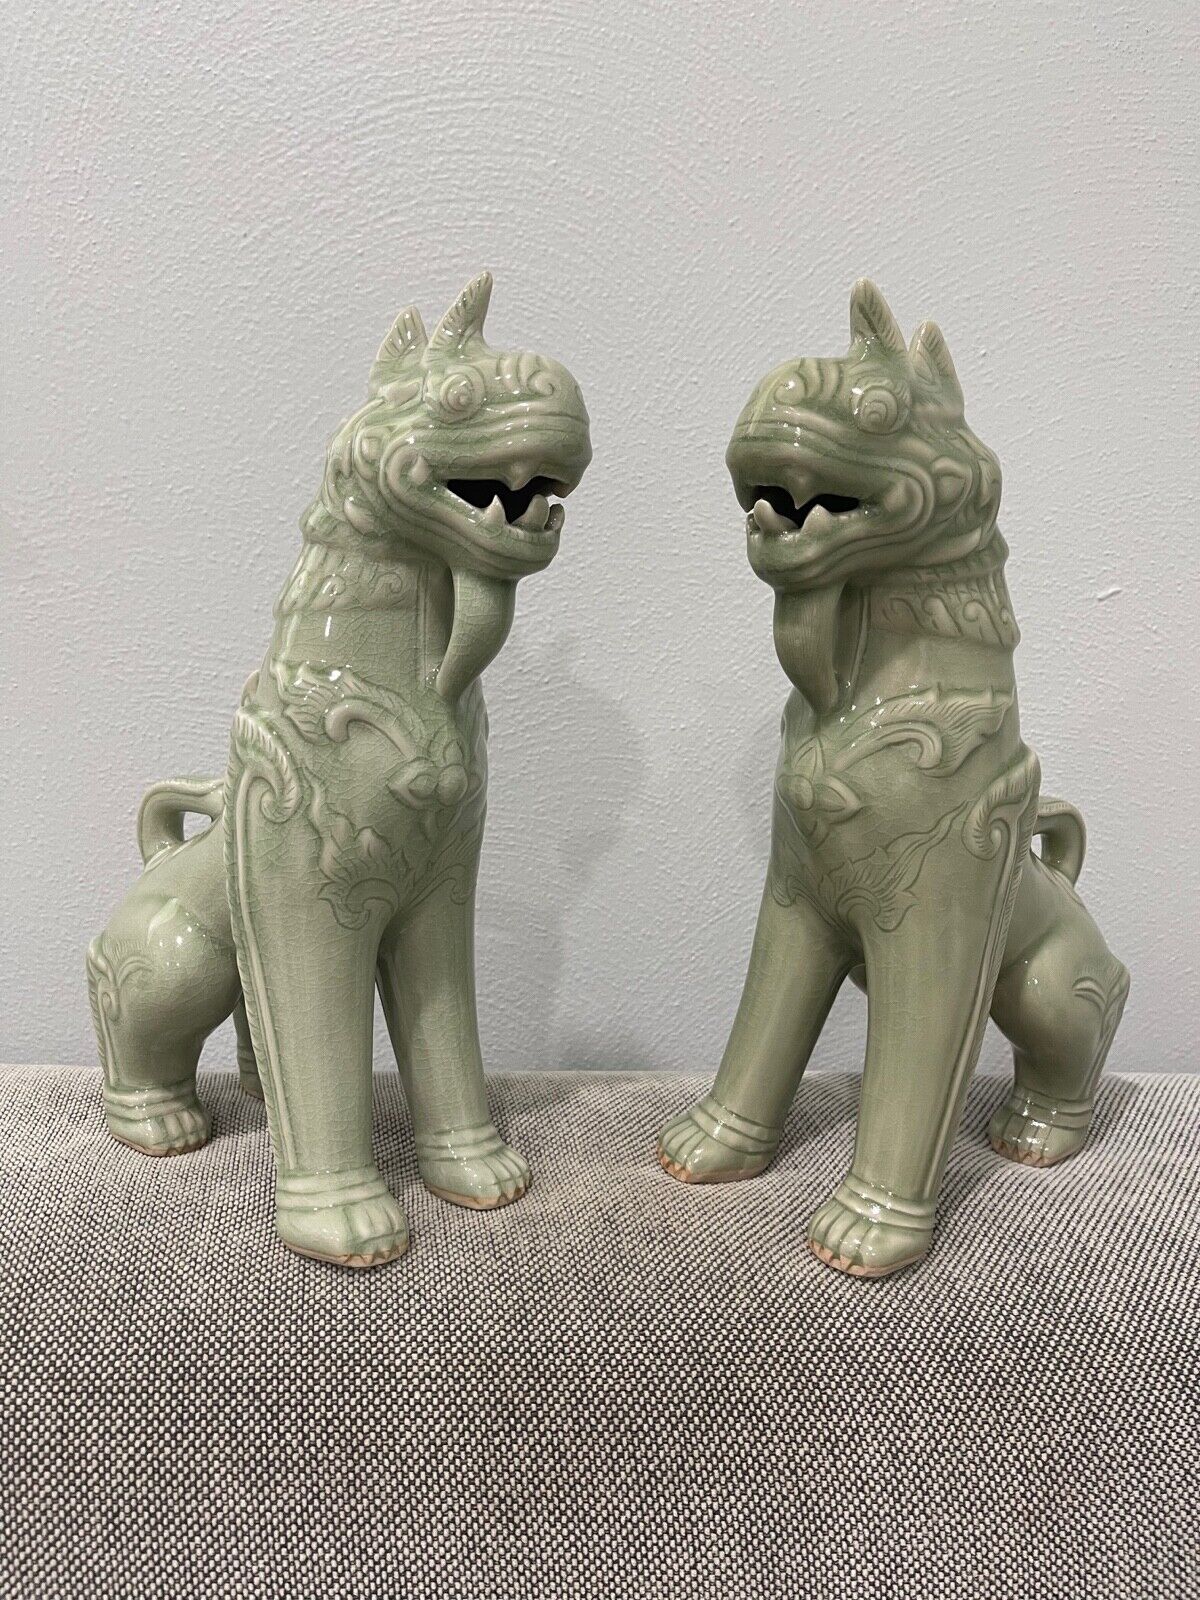 Thai Siam Celadon Green Glazed Pair of Mythical Beasts Qilin Figurines / Statues